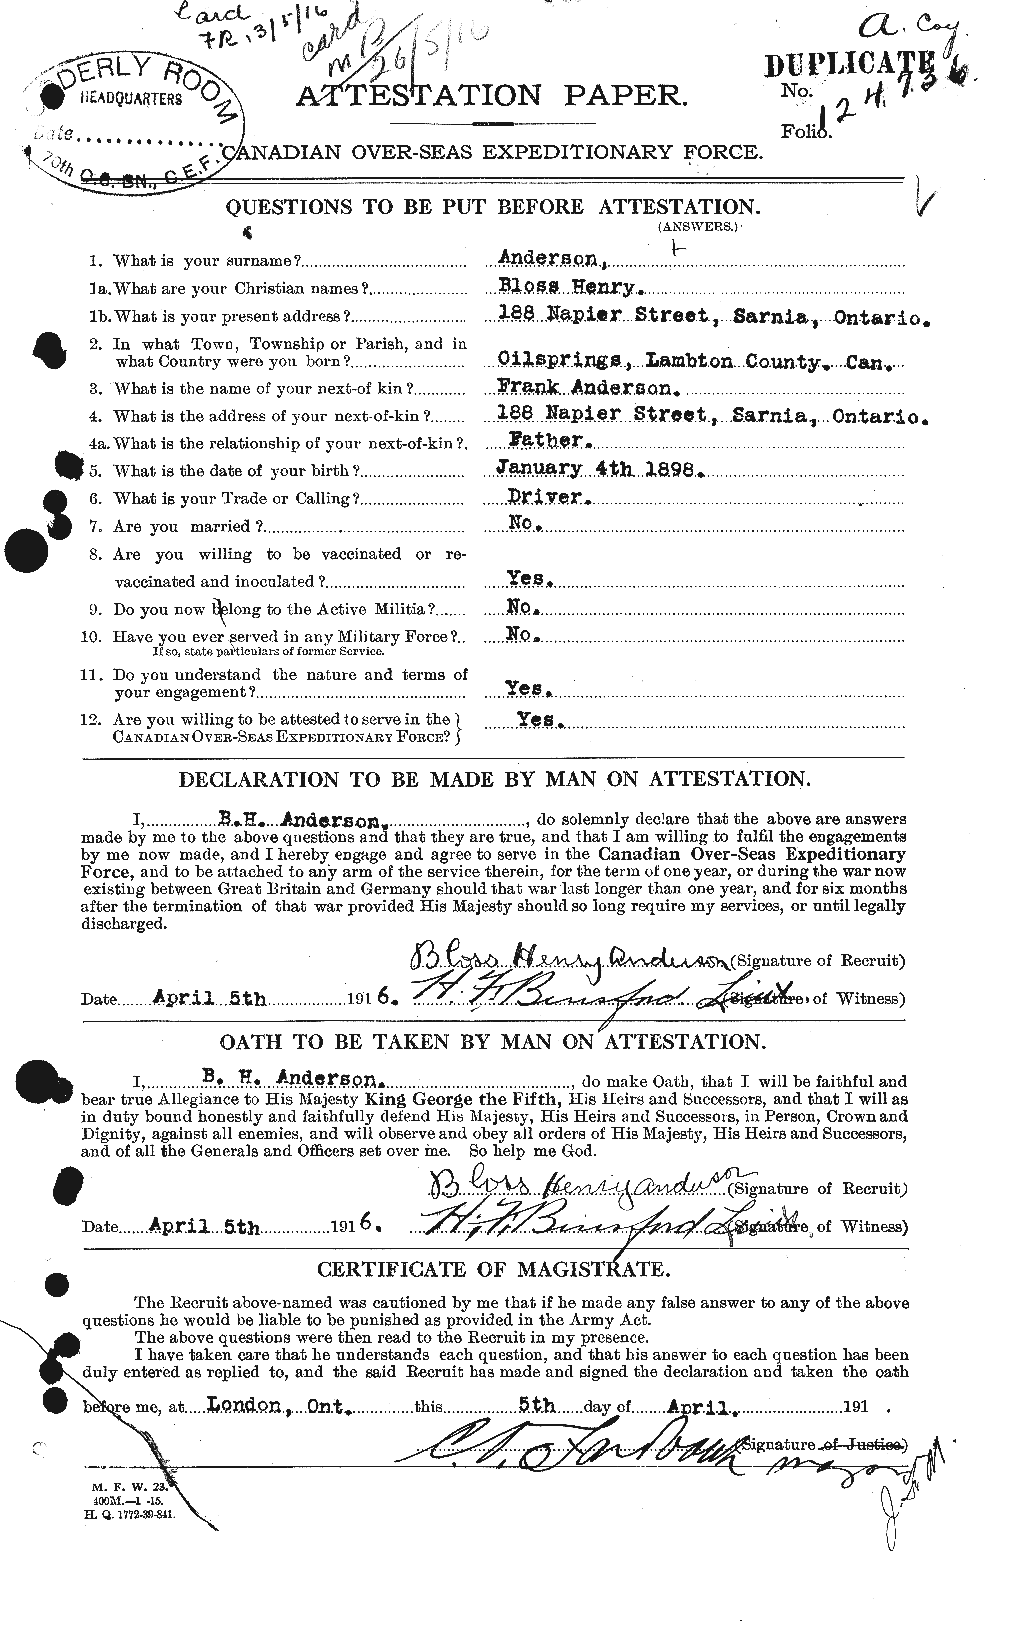 Personnel Records of the First World War - CEF 209308a